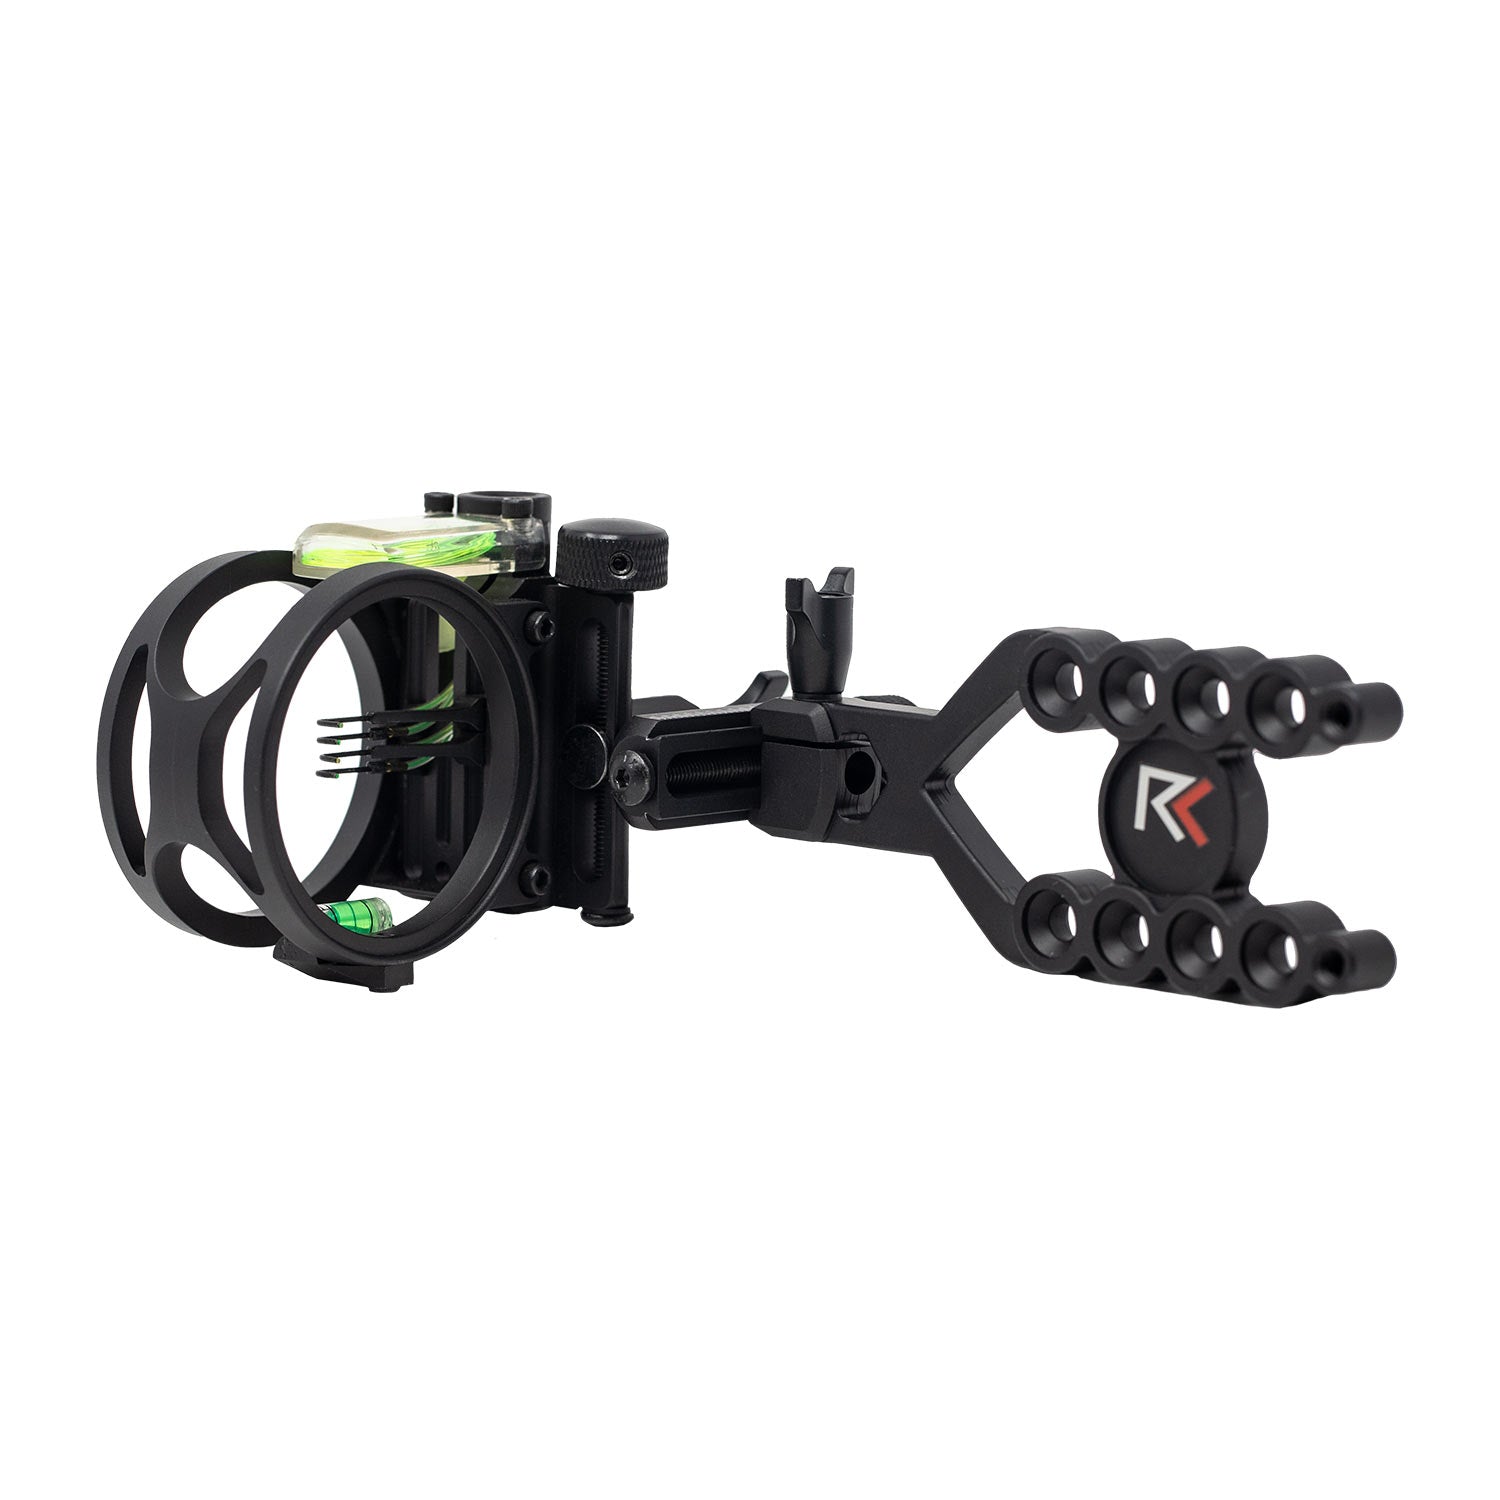 RL-4 Bow Sight - Outdoor Life Best 2022 Budget Bow Sight